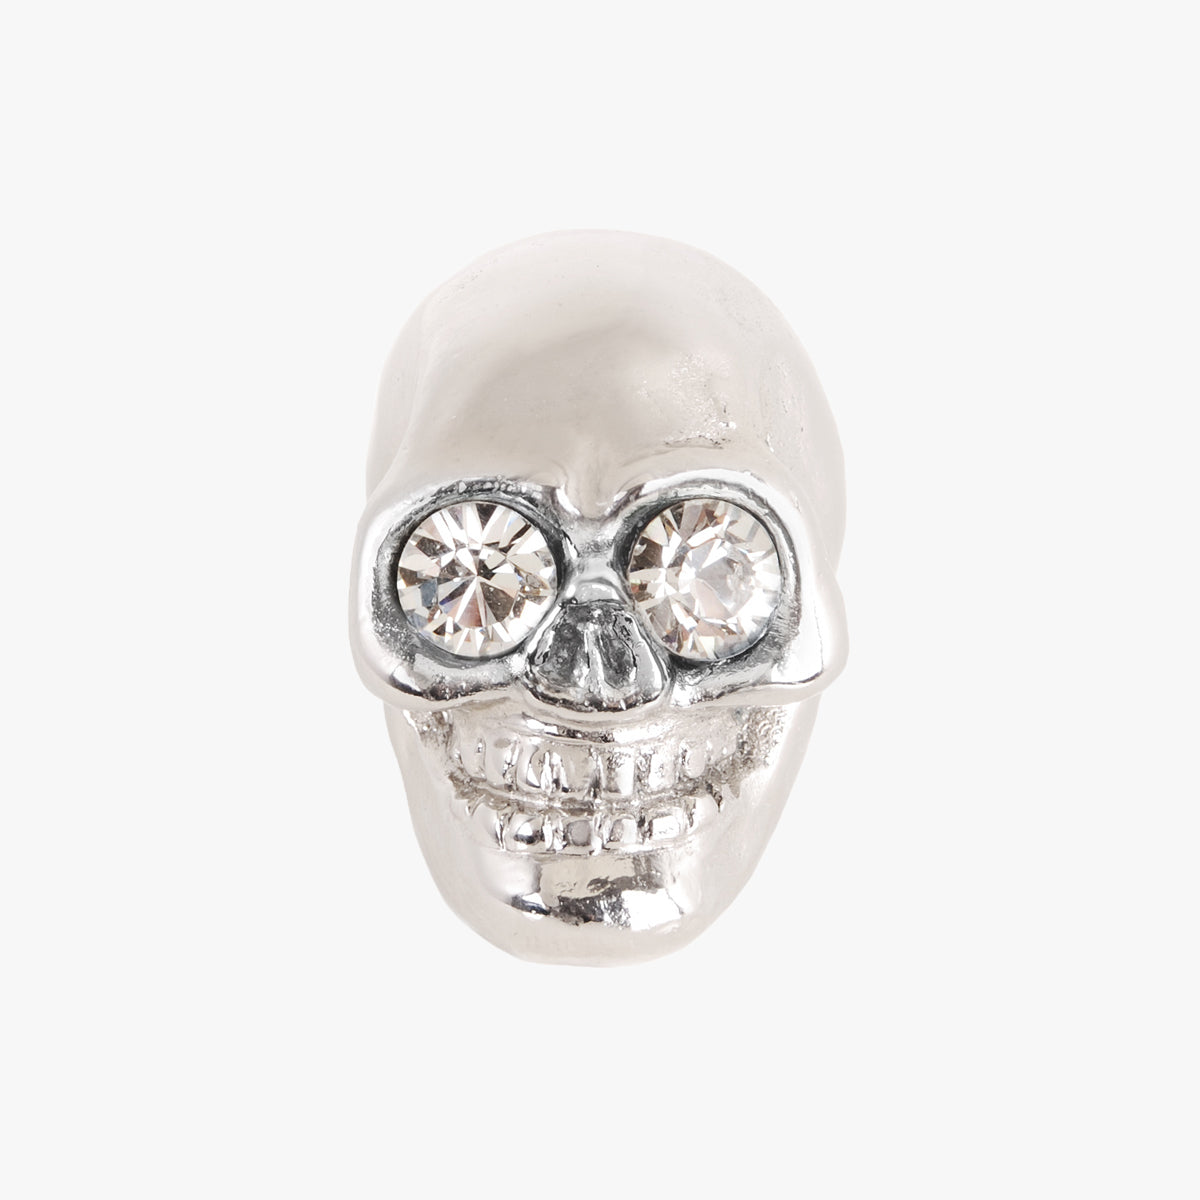 Skull knob handmade with crystal and polished chrome by Matthew Studios